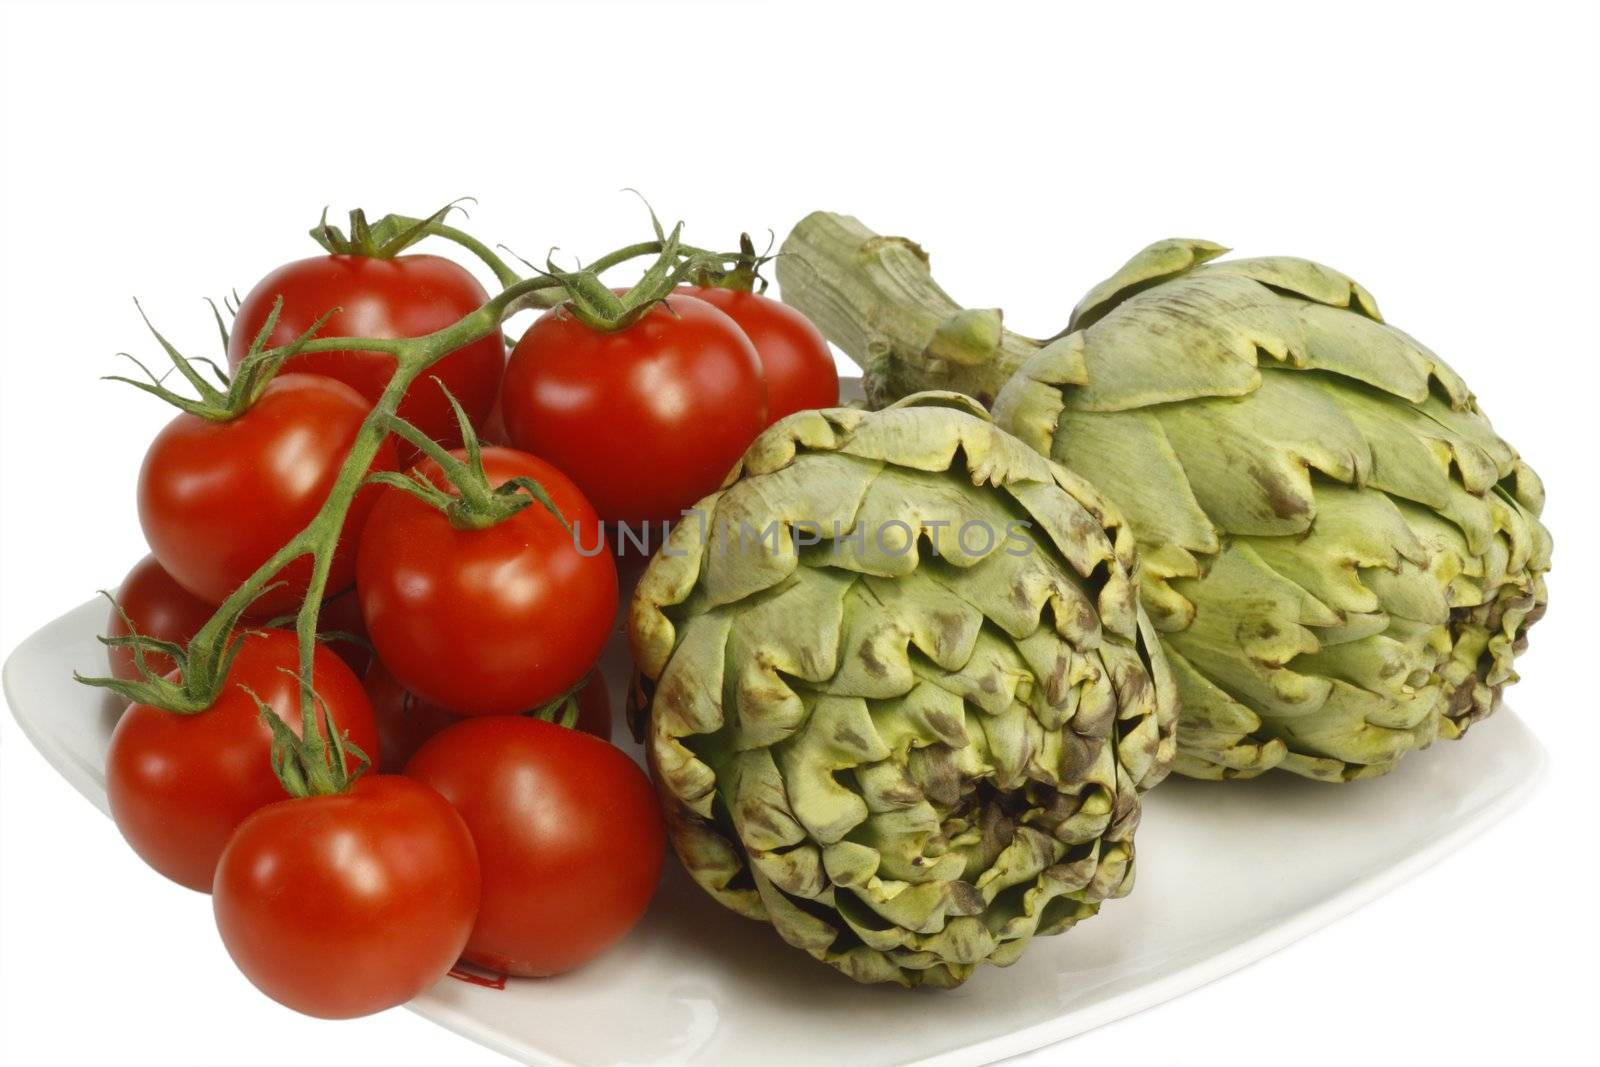 Artichokes and tomatoes by Teamarbeit